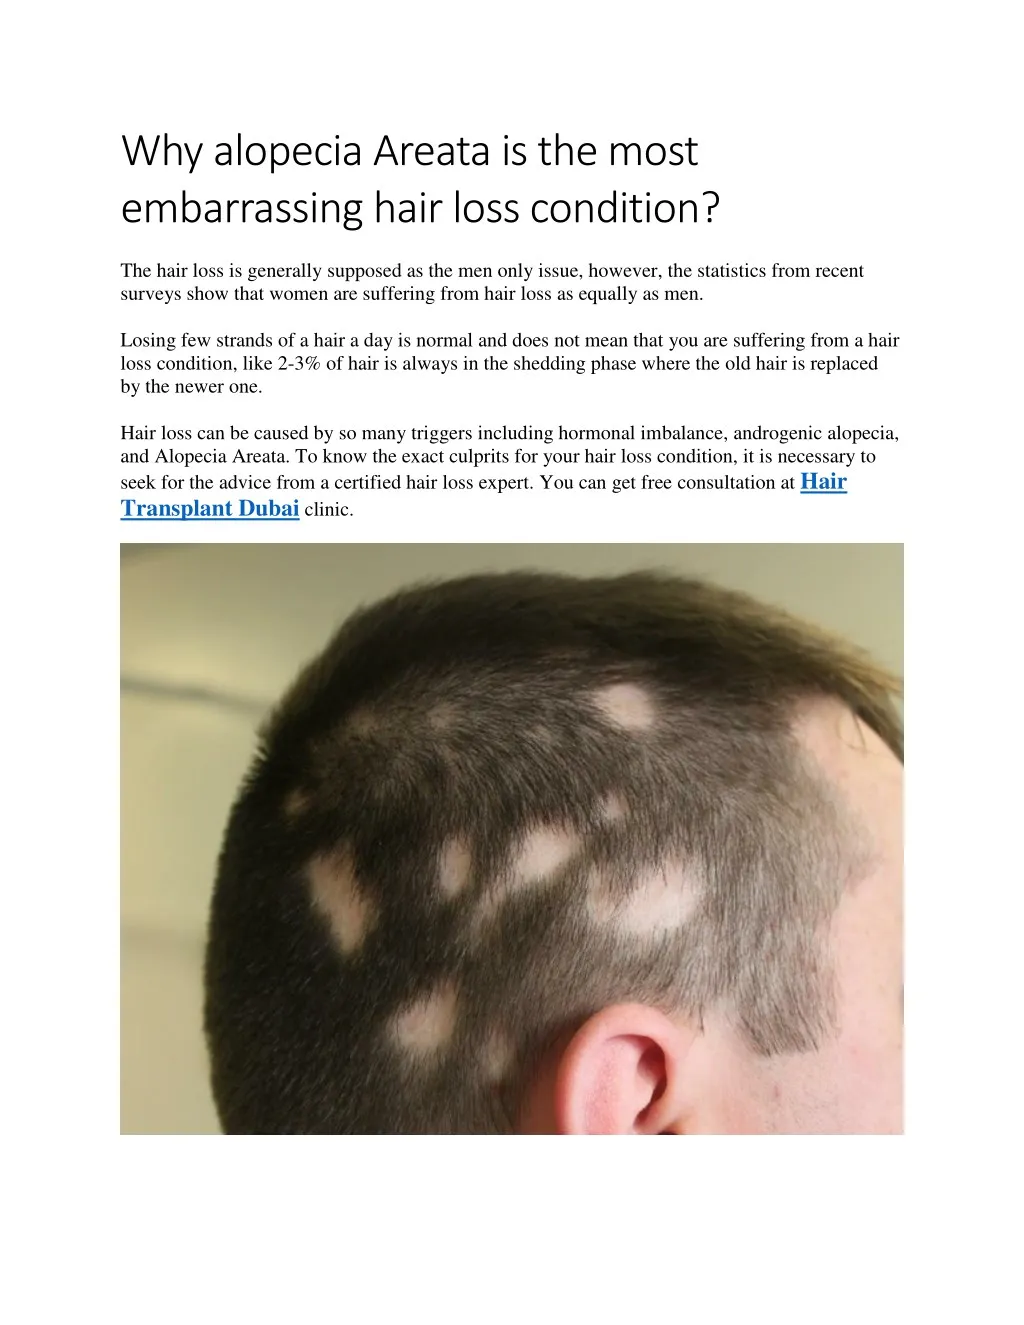 why alopecia areata is the most embarrassing hair